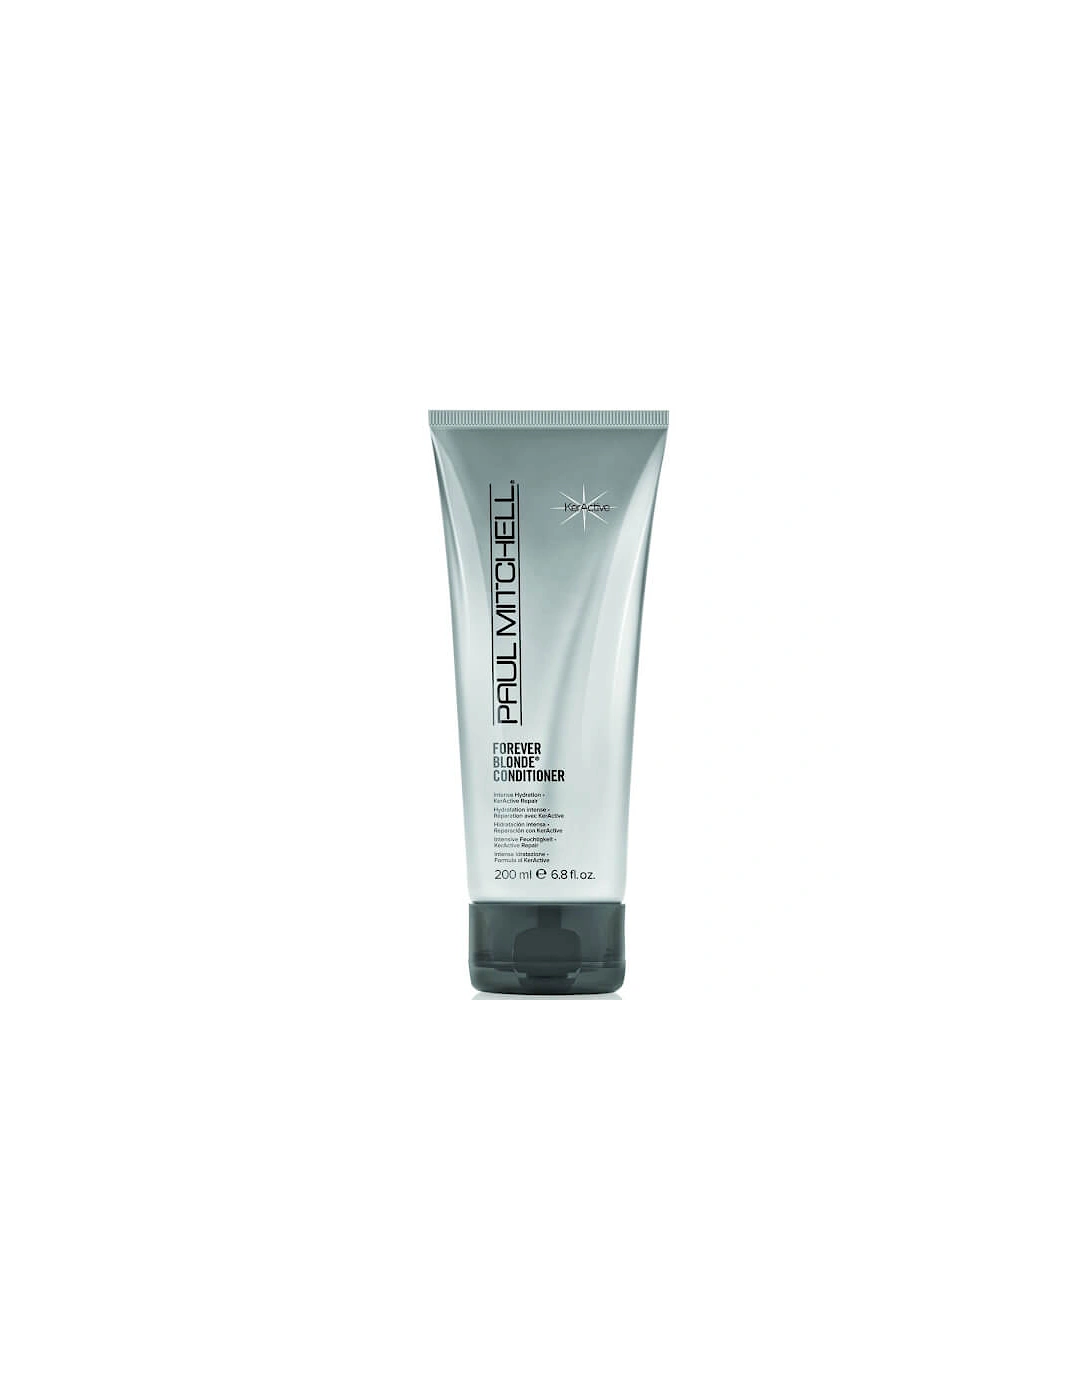 Forever Blonde Conditioner (200ml), 2 of 1